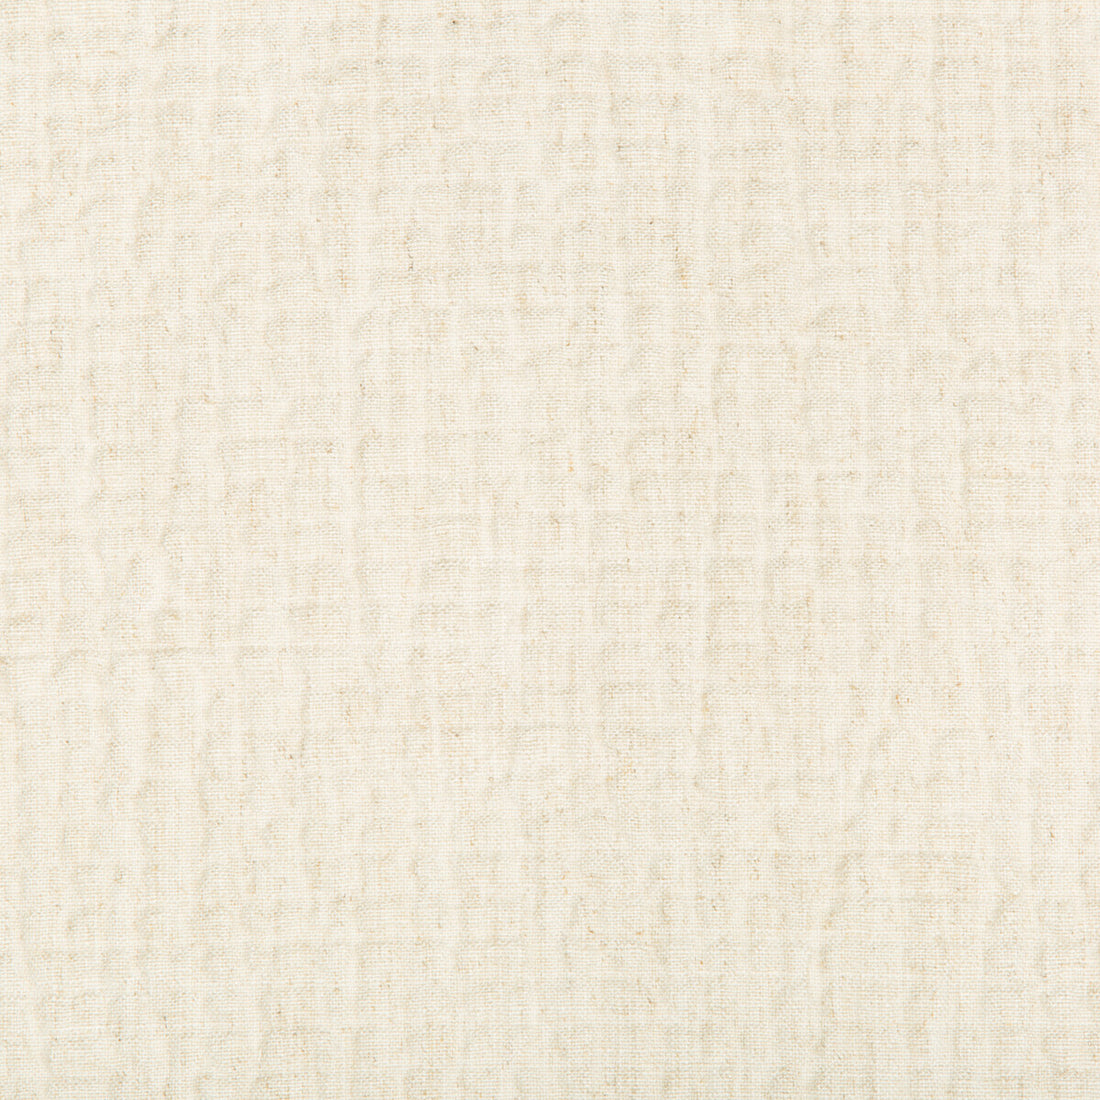 Cachuma fabric in linen color - pattern 34963.16.0 - by Kravet Couture in the Sue Firestone Malibu collection